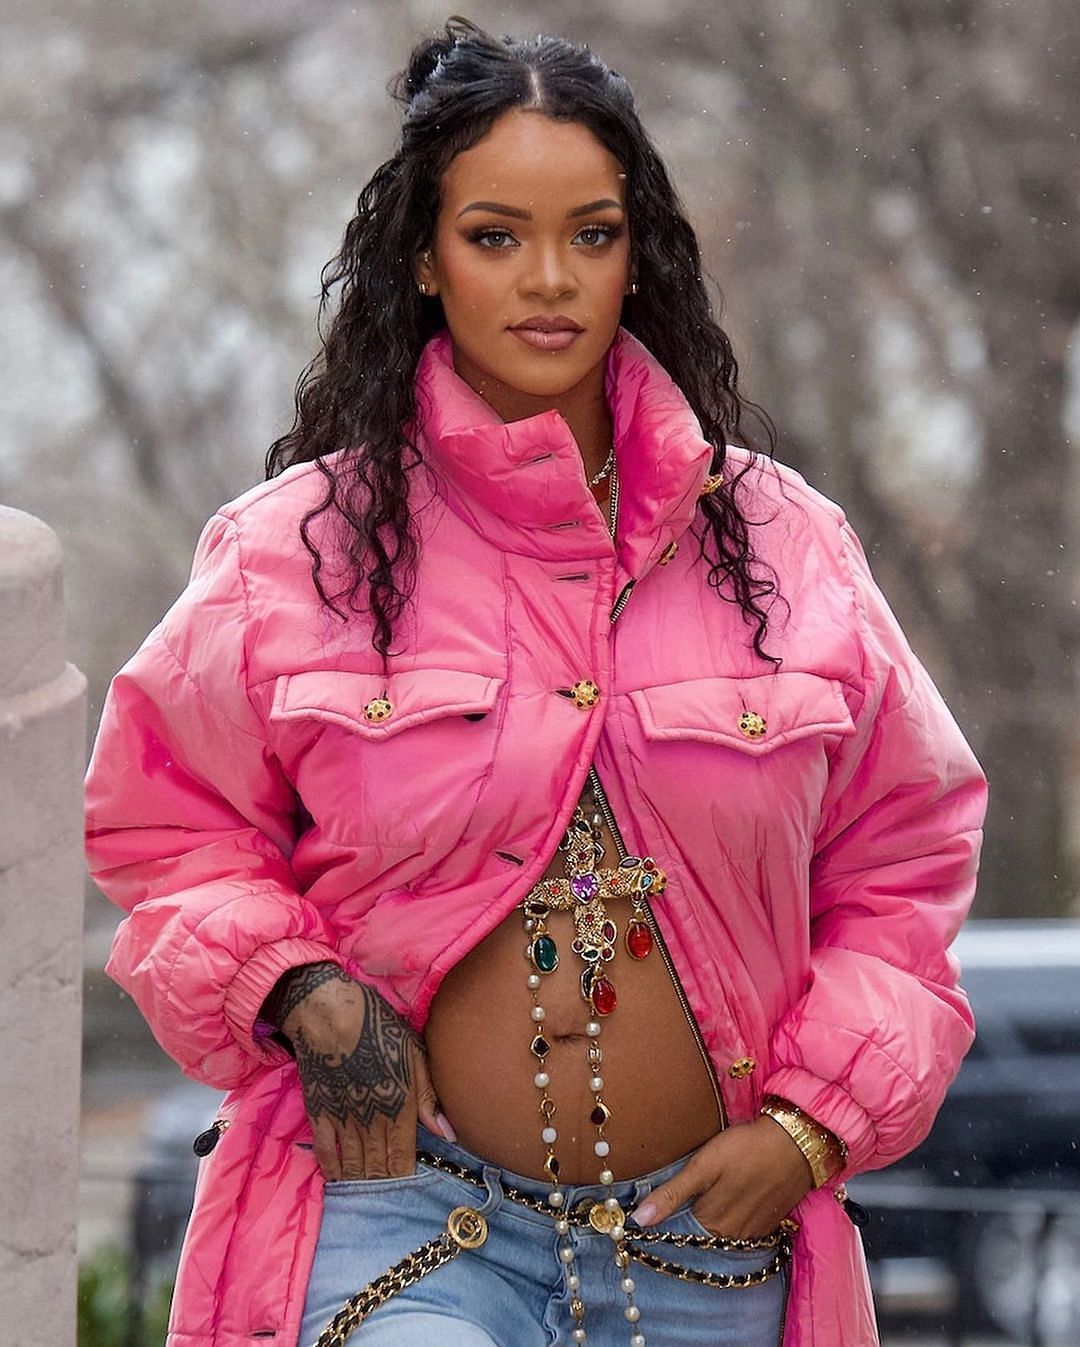 Photos of a pregnant Rihanna taking a walk with Rocky have surfaced on the internet.